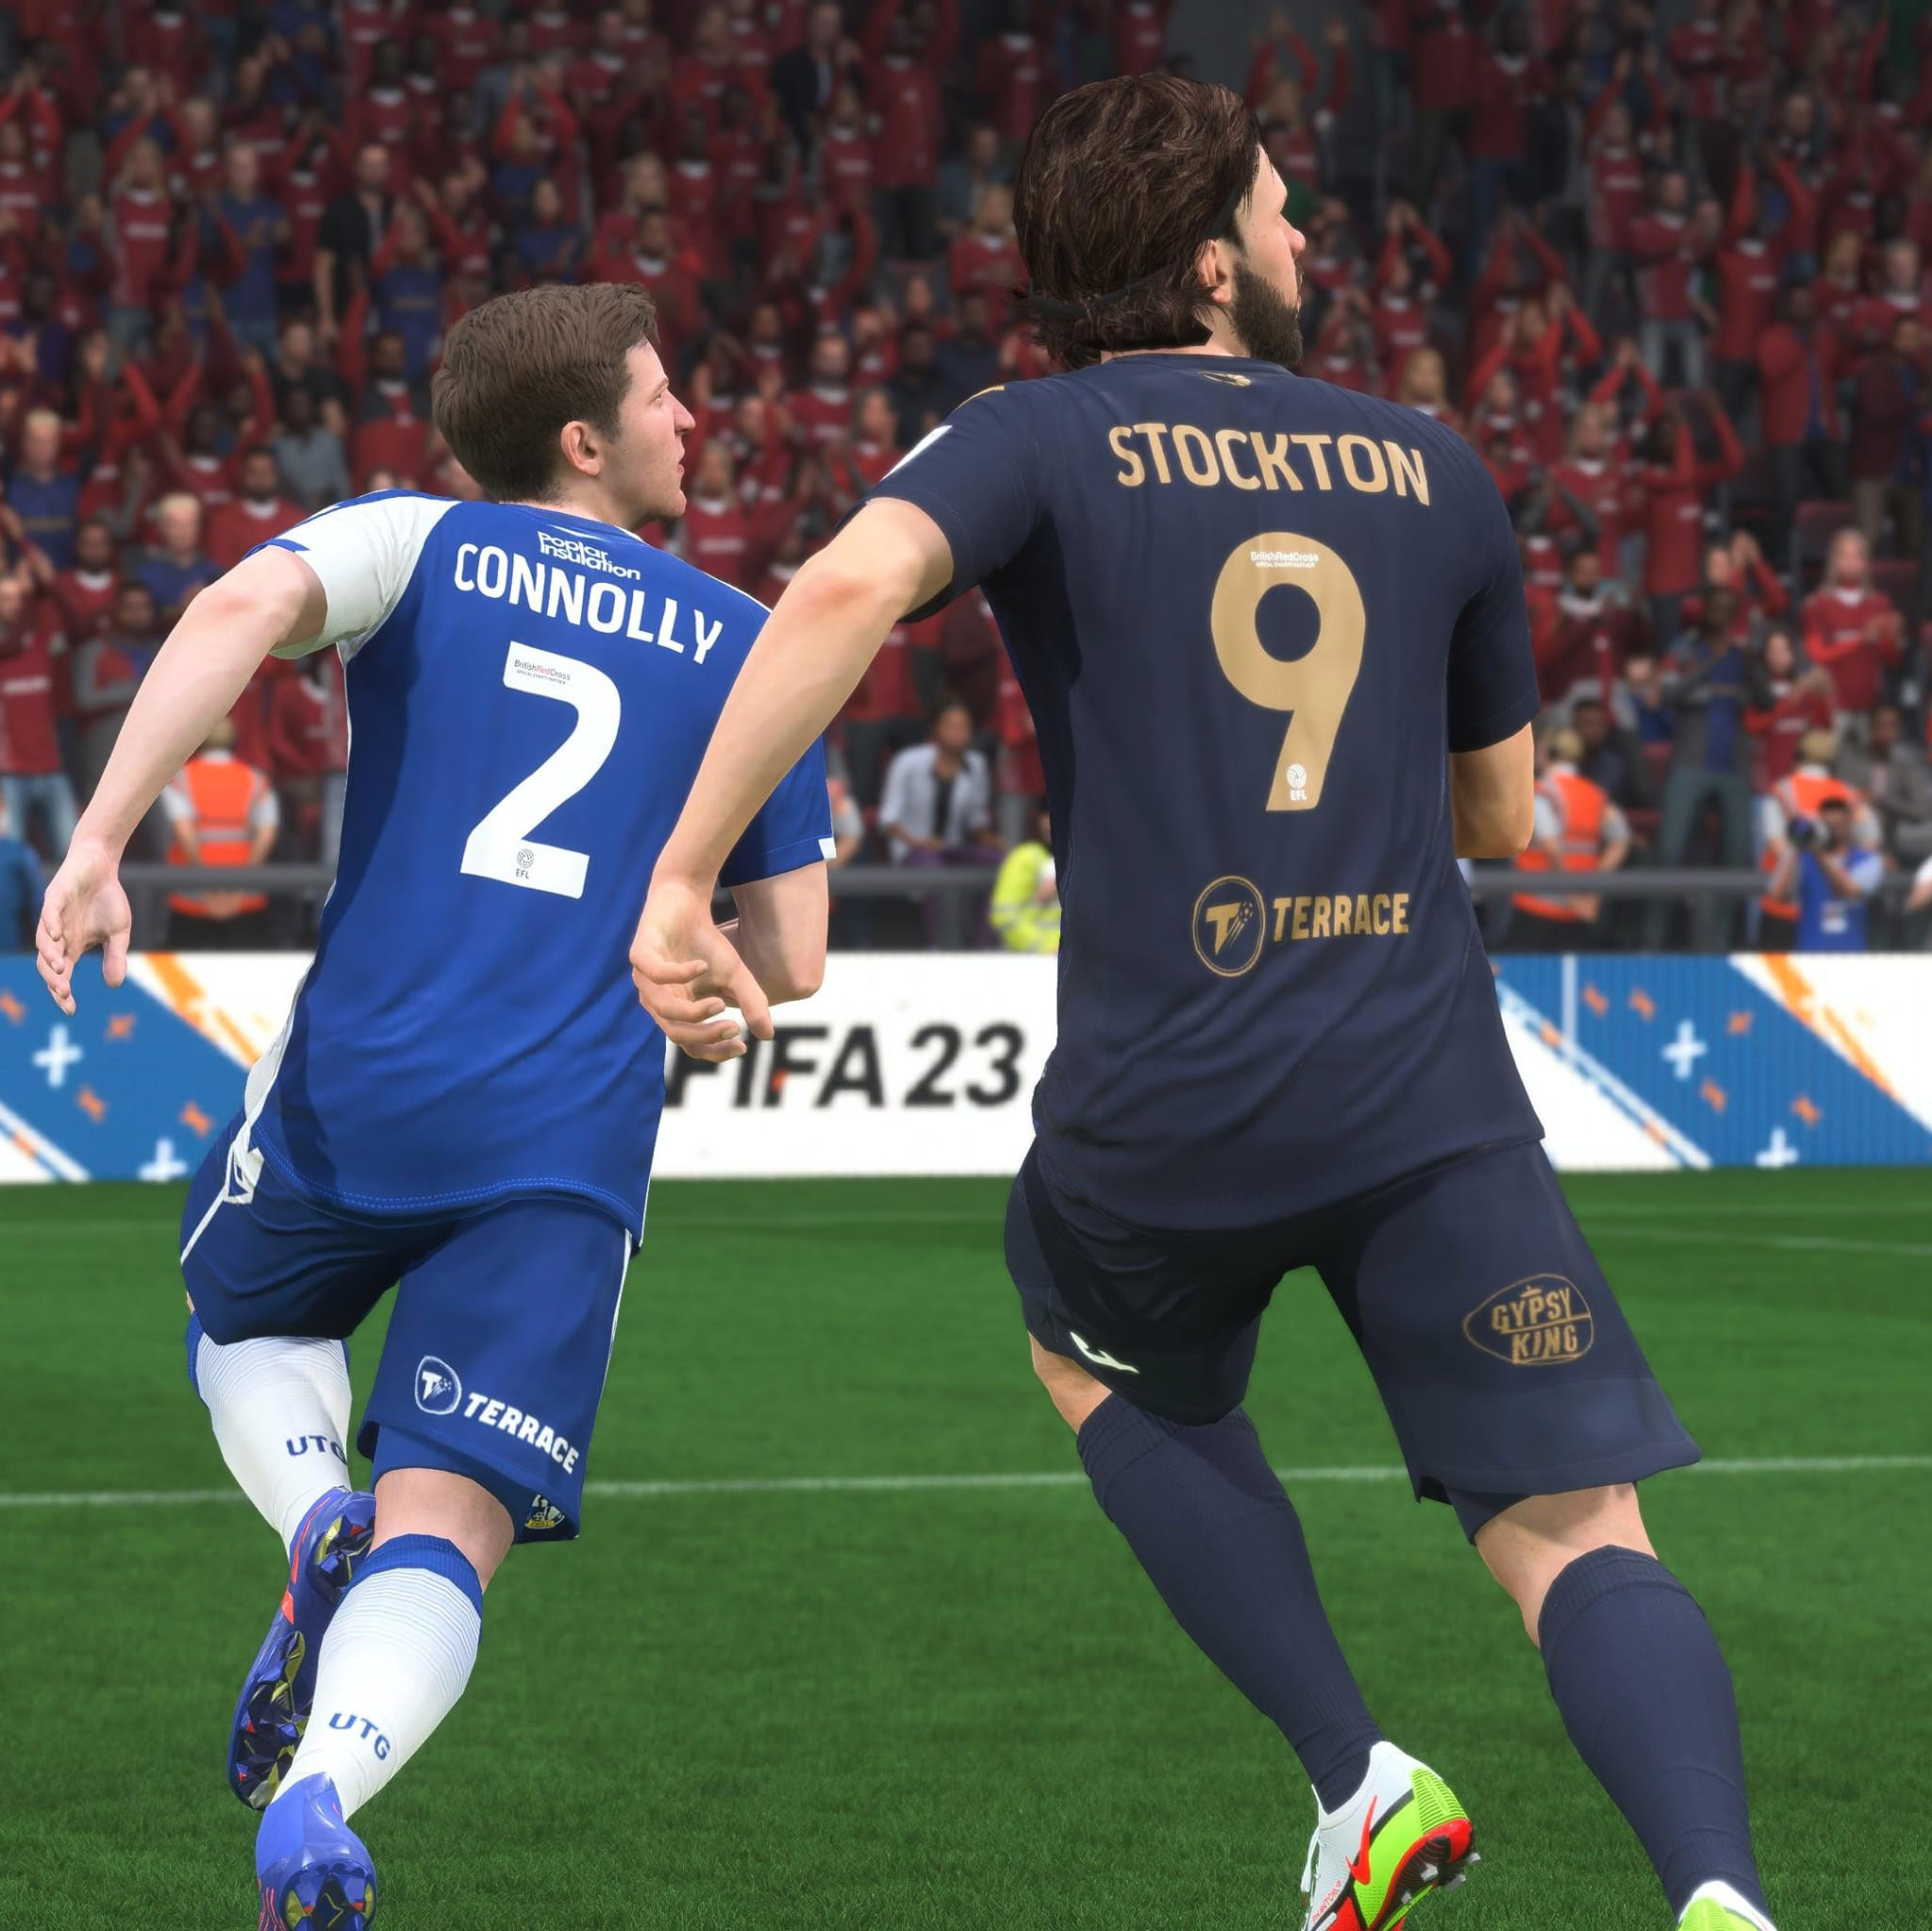 A screenshot from EA Sports FIFA showing The Terrace's kit sponsorship of Bristol Rovers and Morecambe.